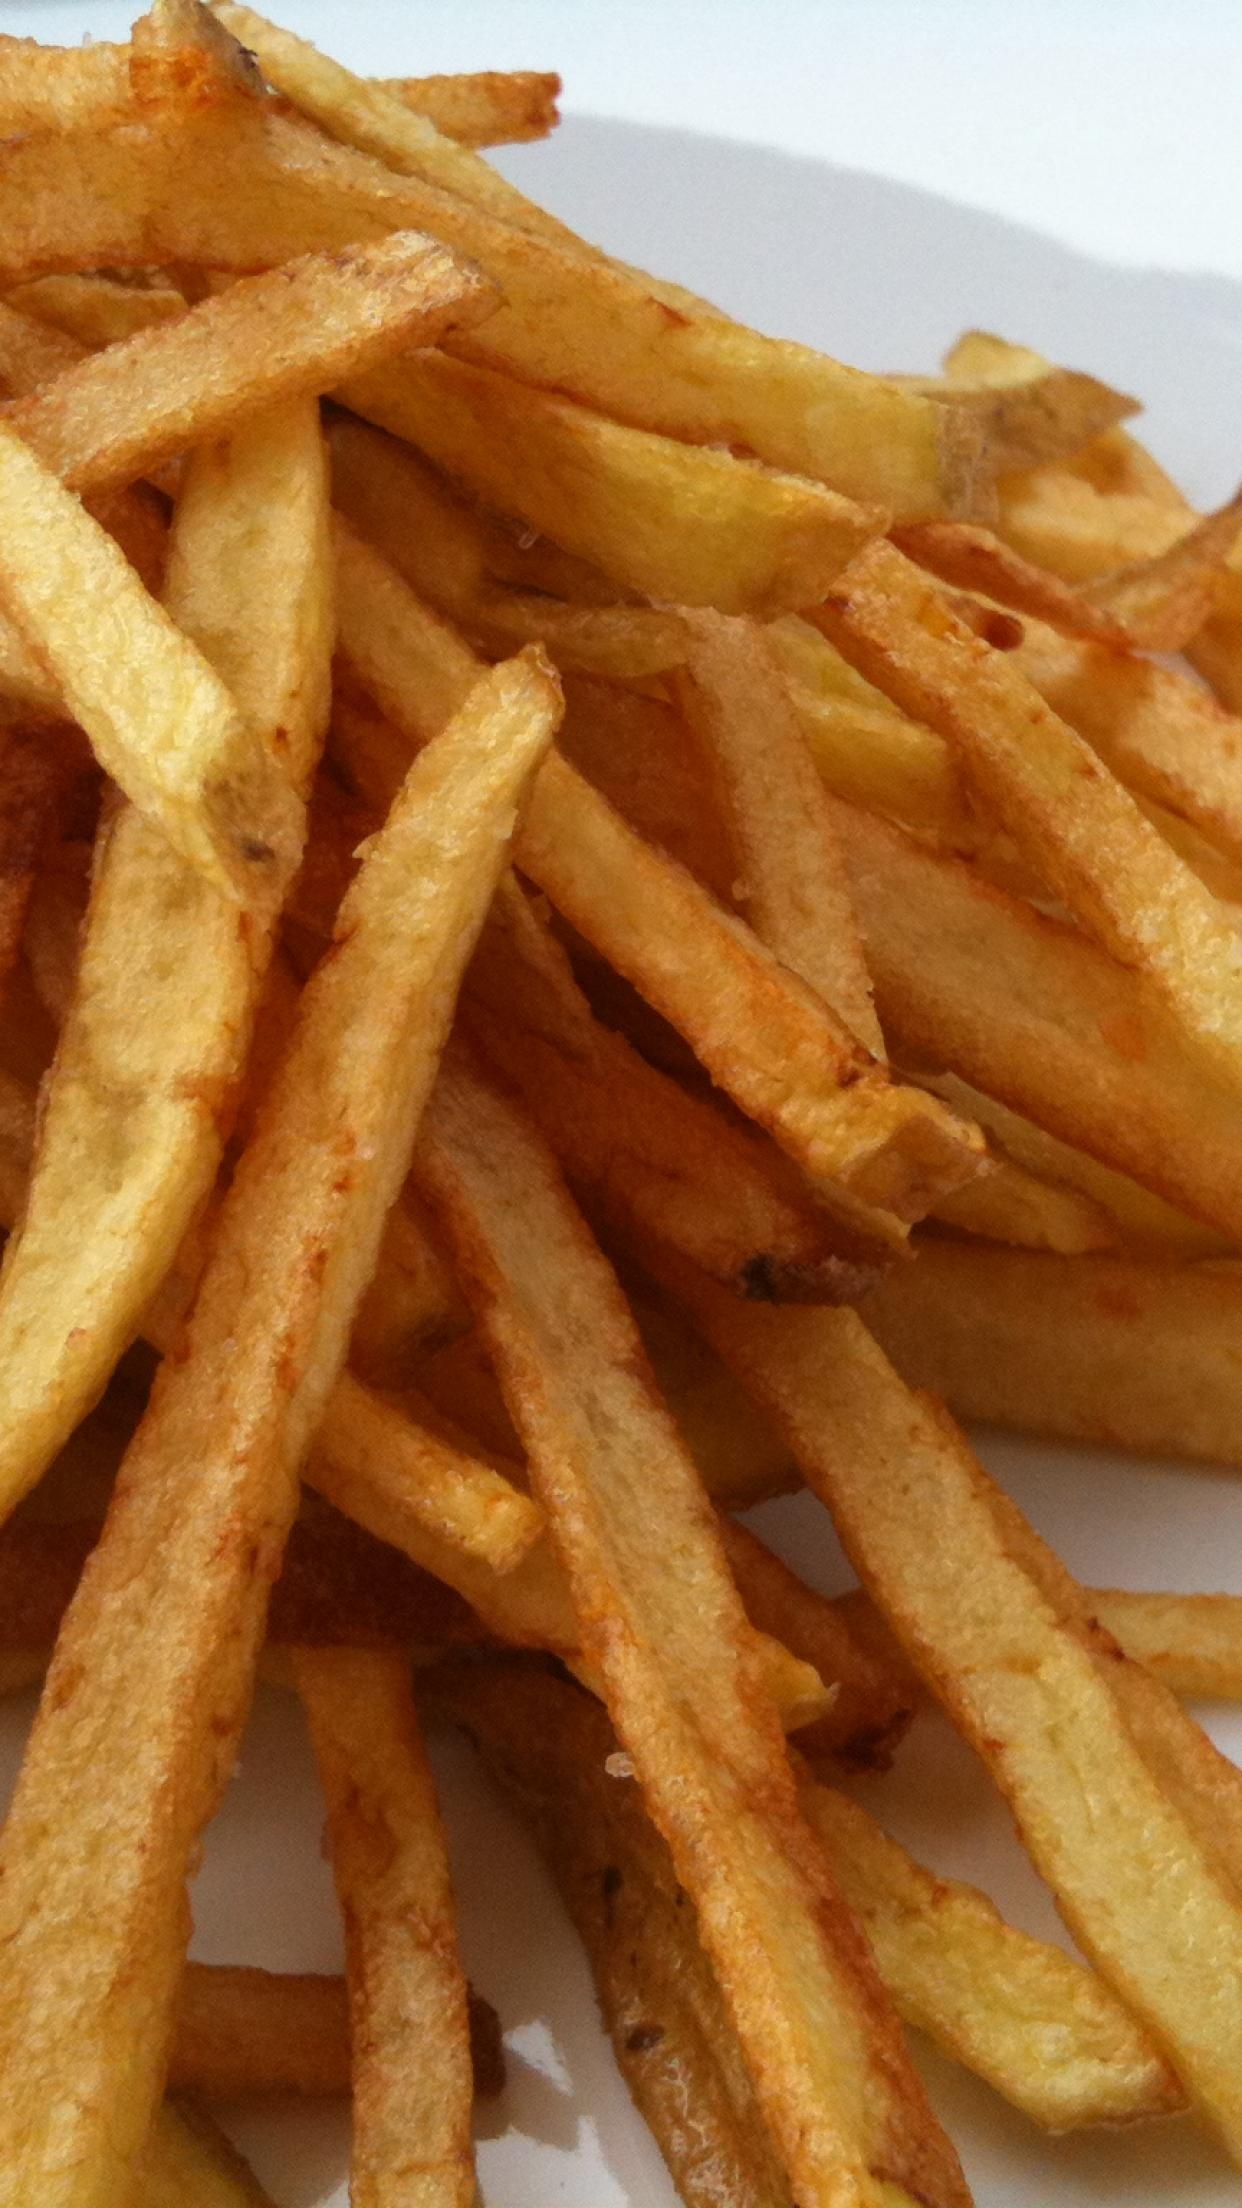 French Fries: Potatoes used are often Russet Burbank or Idaho potatoes. 1250x2210 HD Wallpaper.